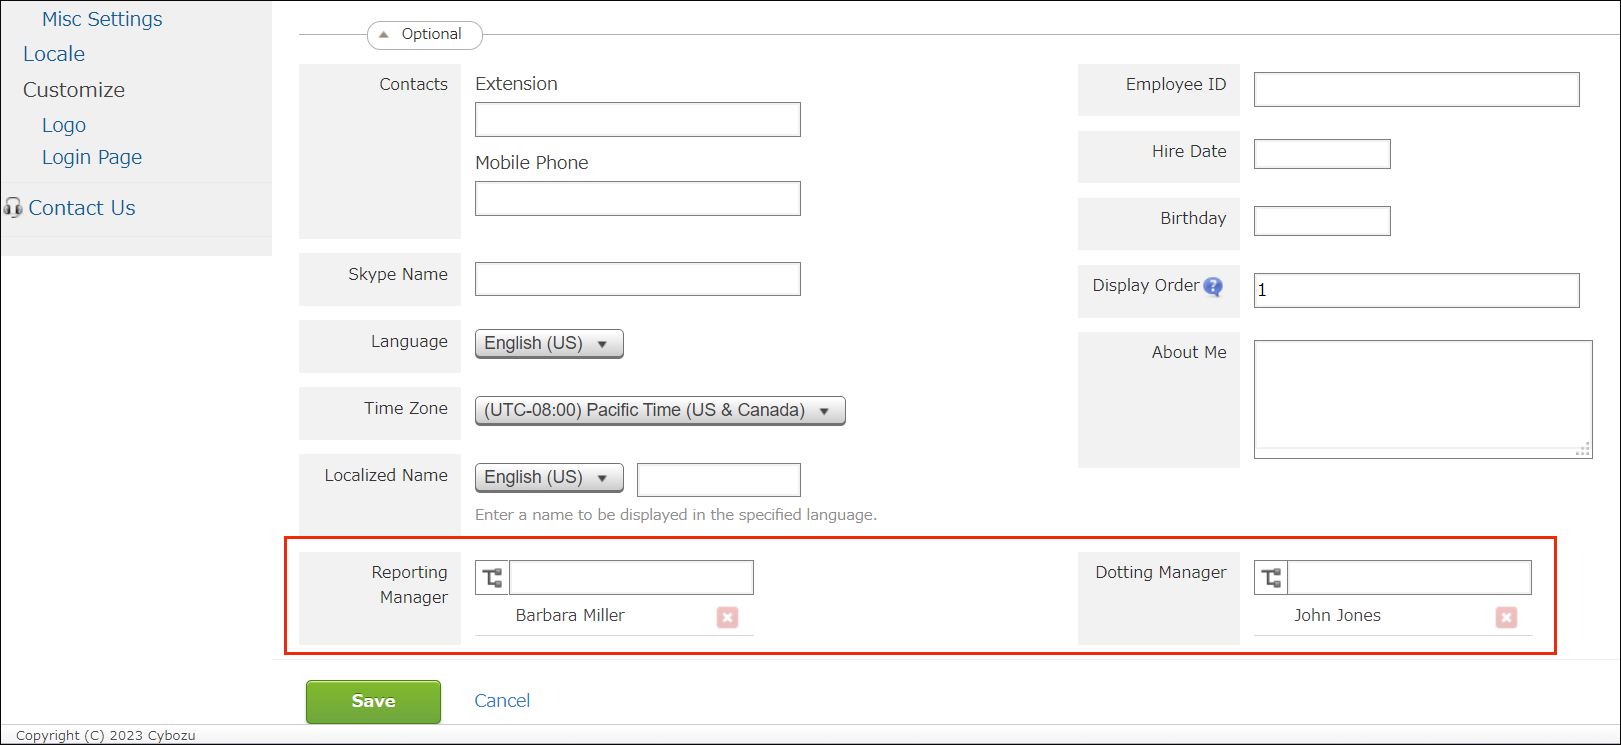 Adding a custom field for a reporting manager